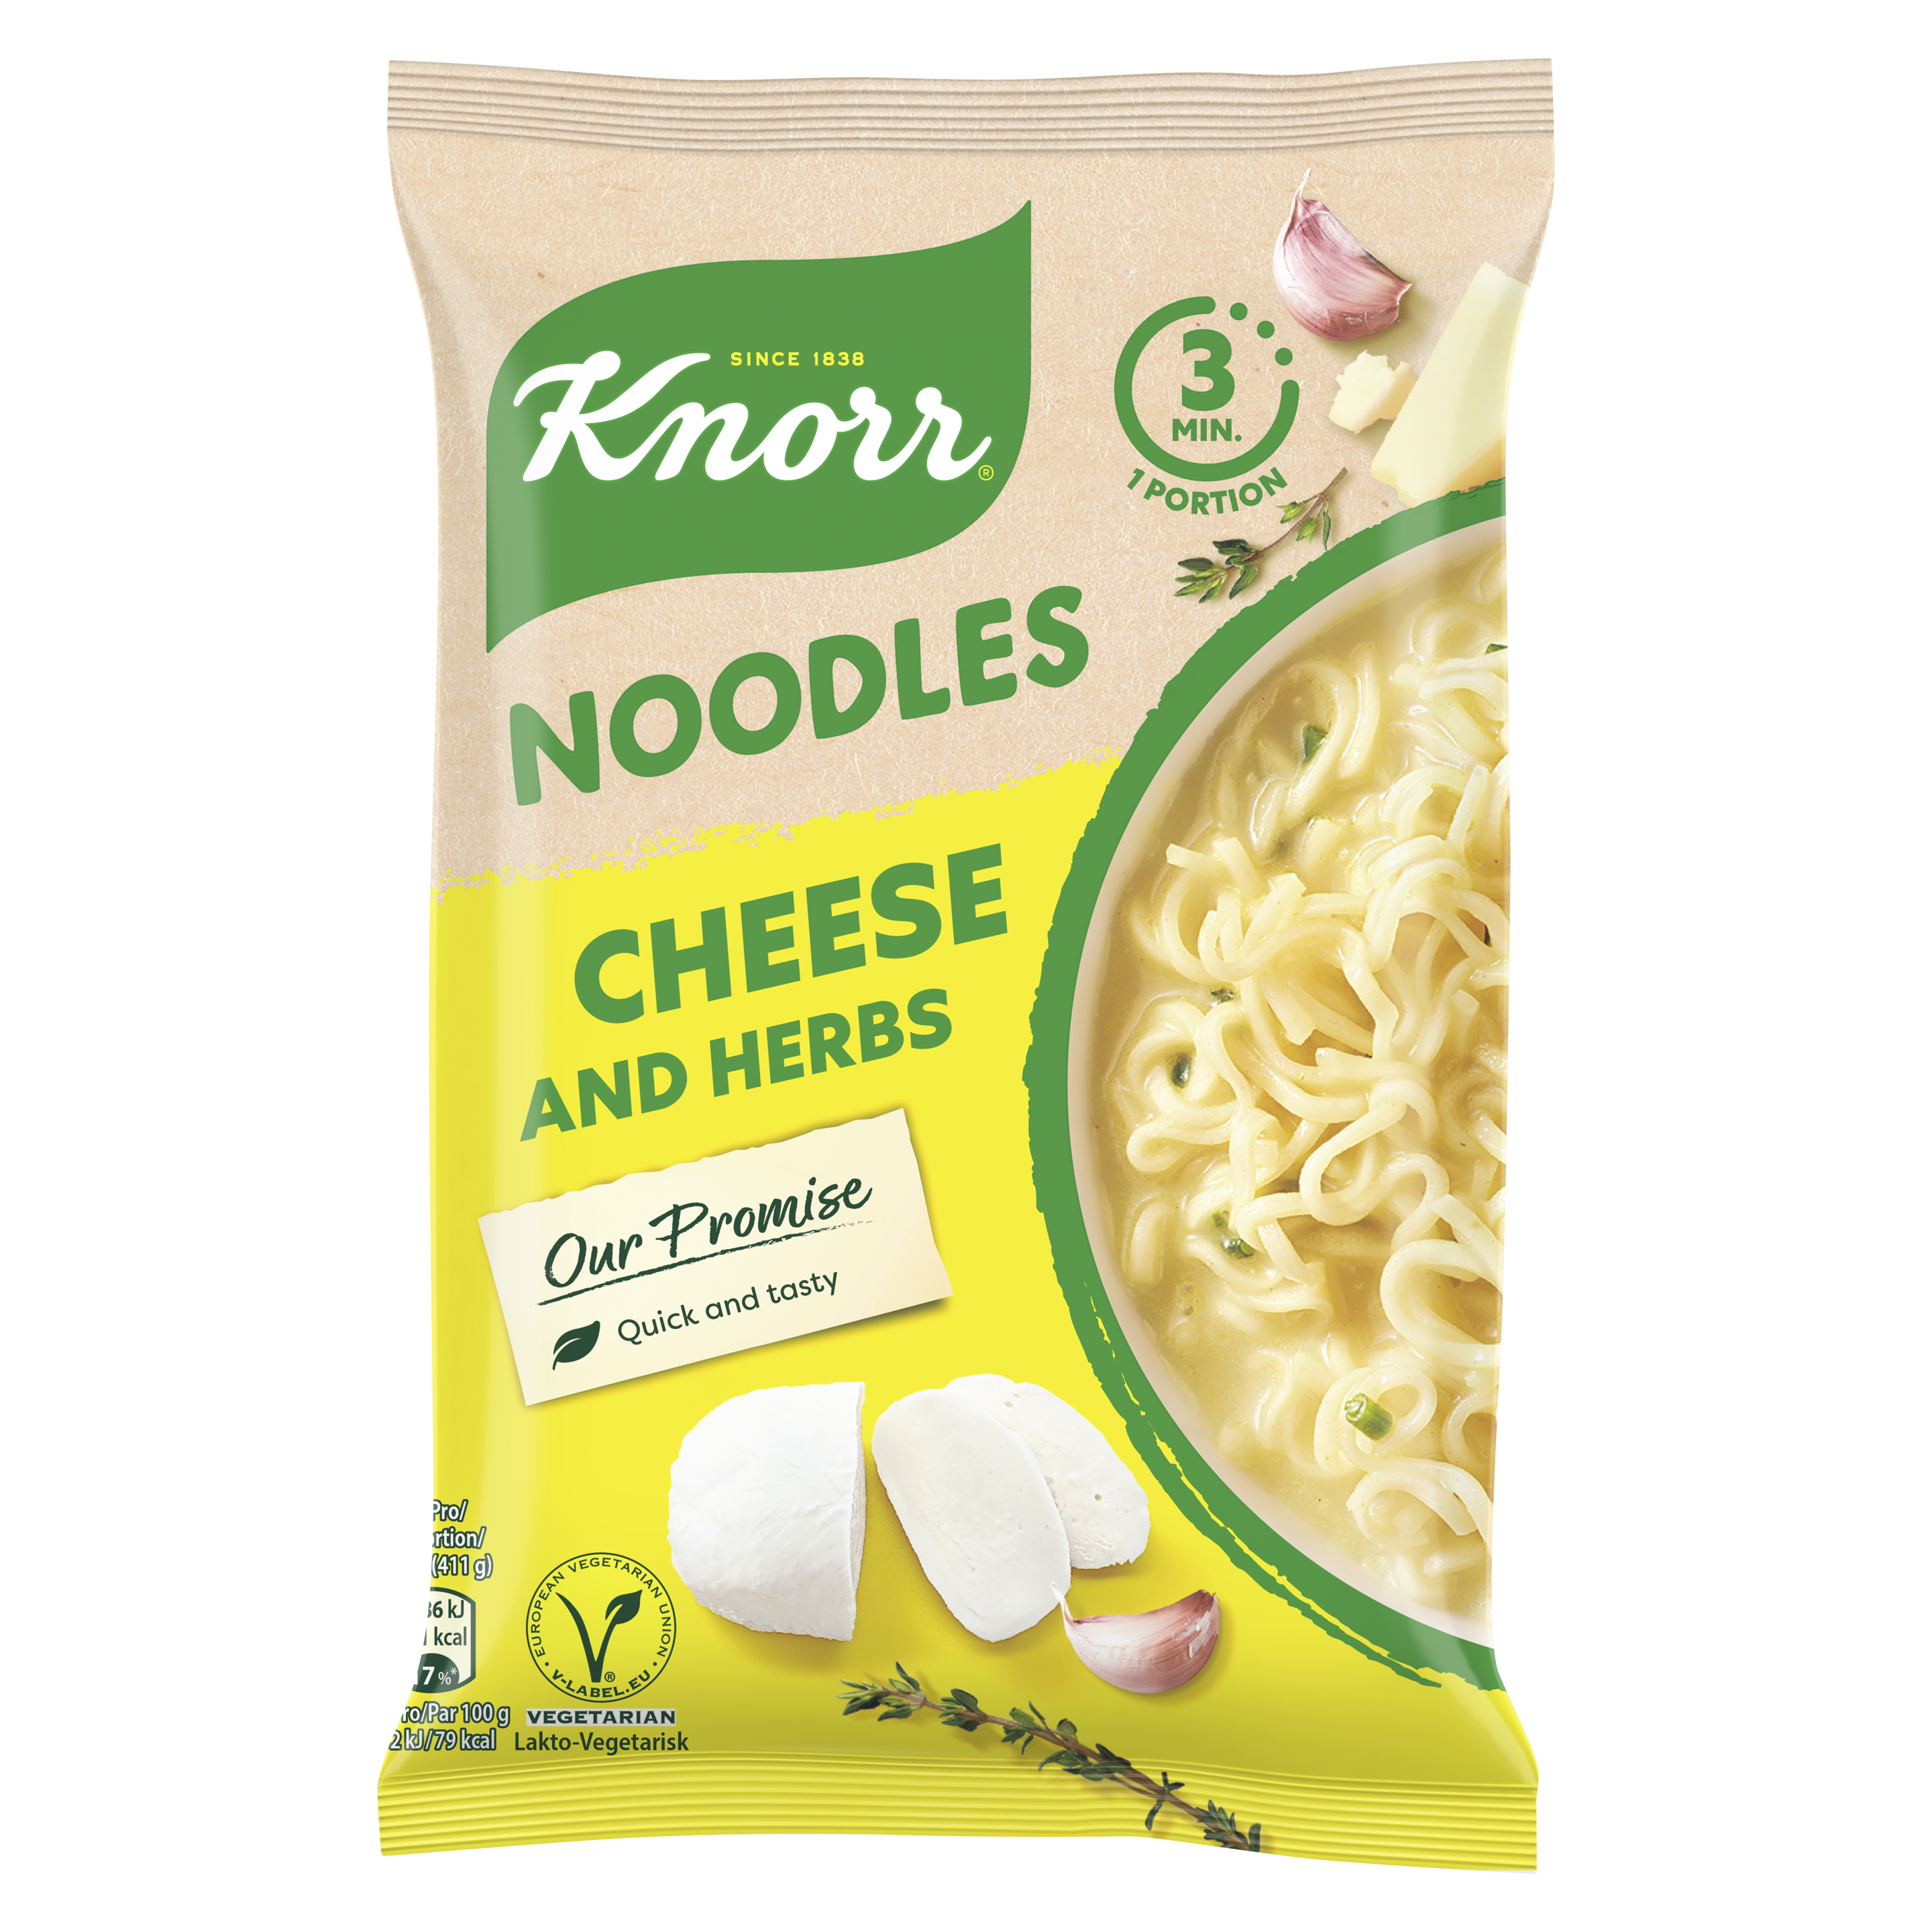 KNORR Noodles Cheese and Herbs sachet 1 portion